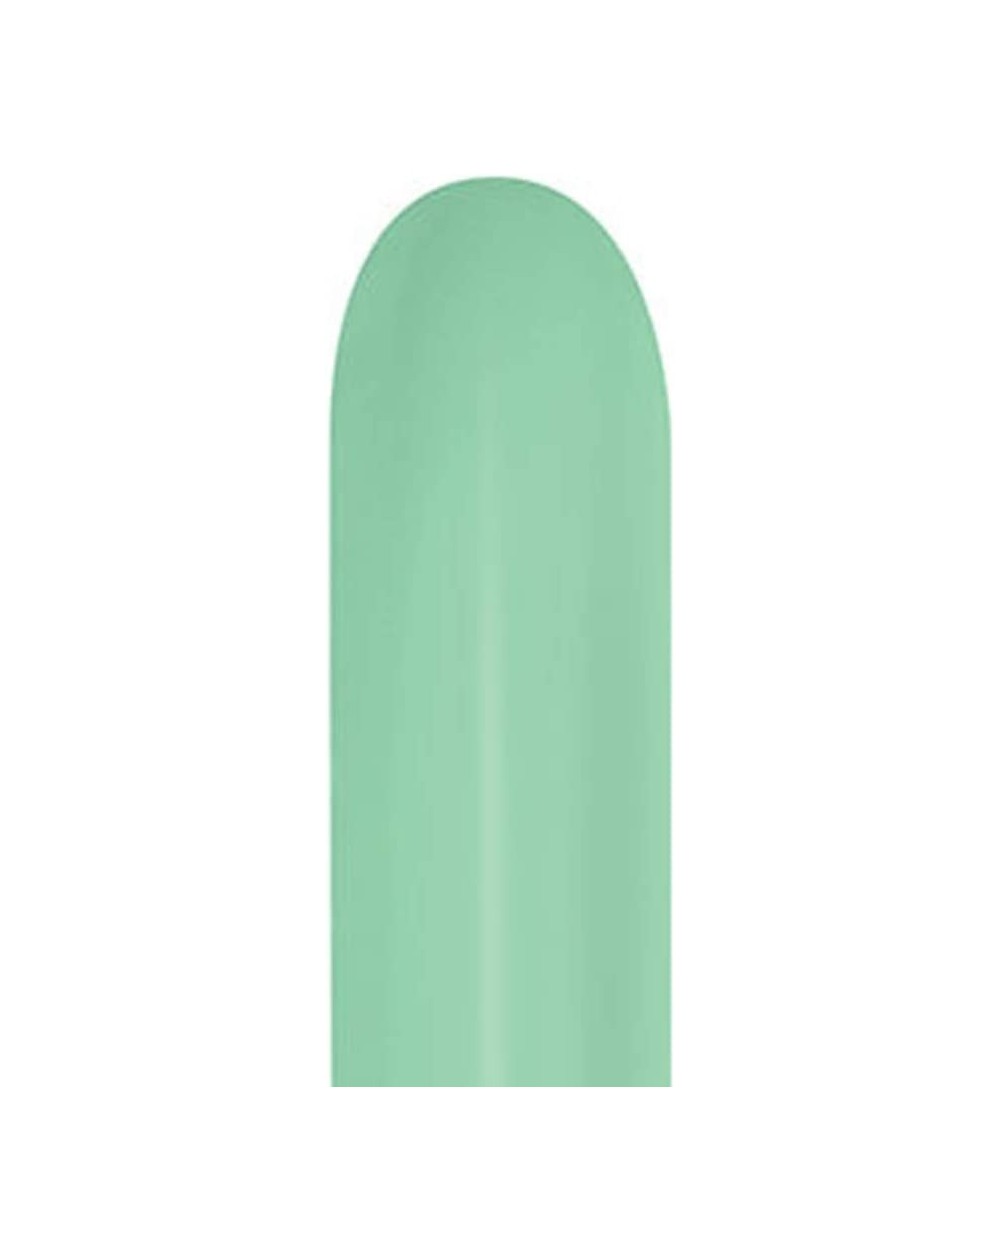 Balloons 260B Solid Latex Balloons - Deluxe Mint Green (50/Pack) - Deluxe Mint Green - CD18K5U0I4L $9.27